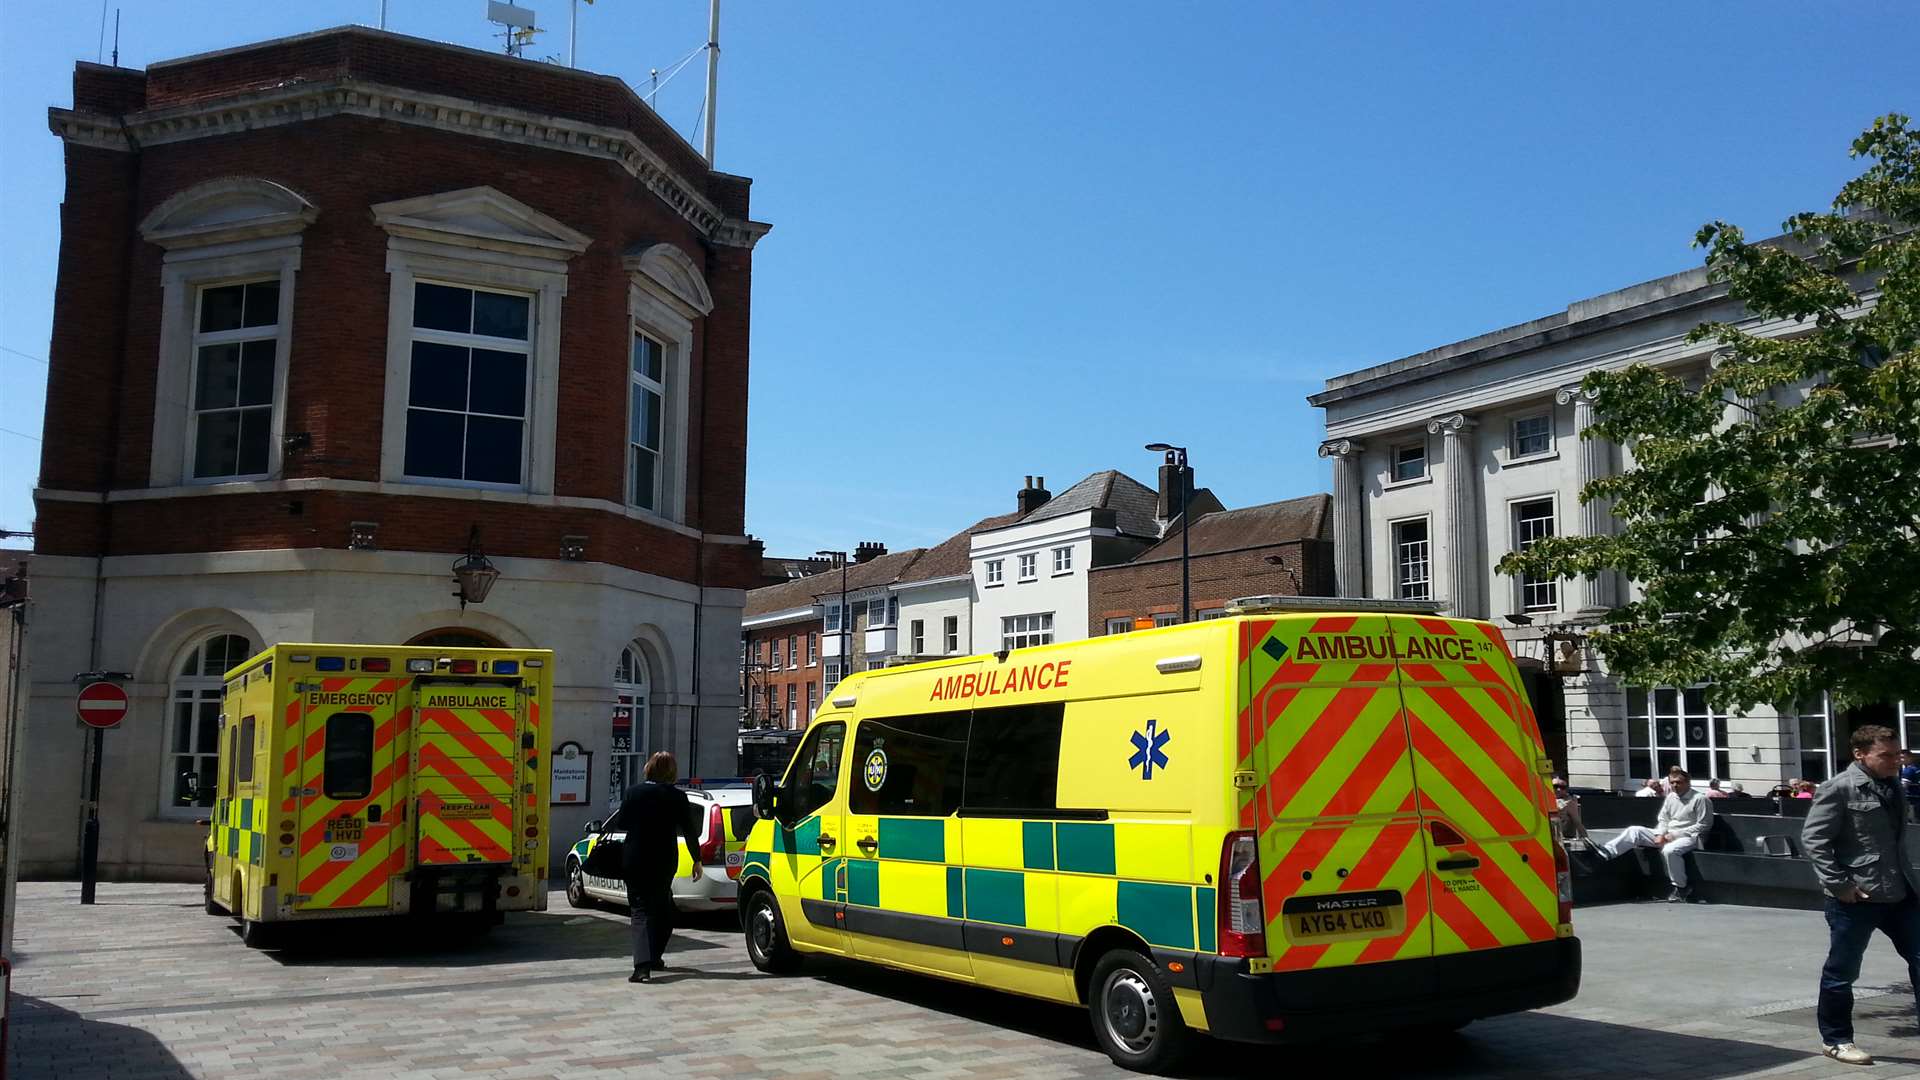 The scene outside the town hall in Maidstone